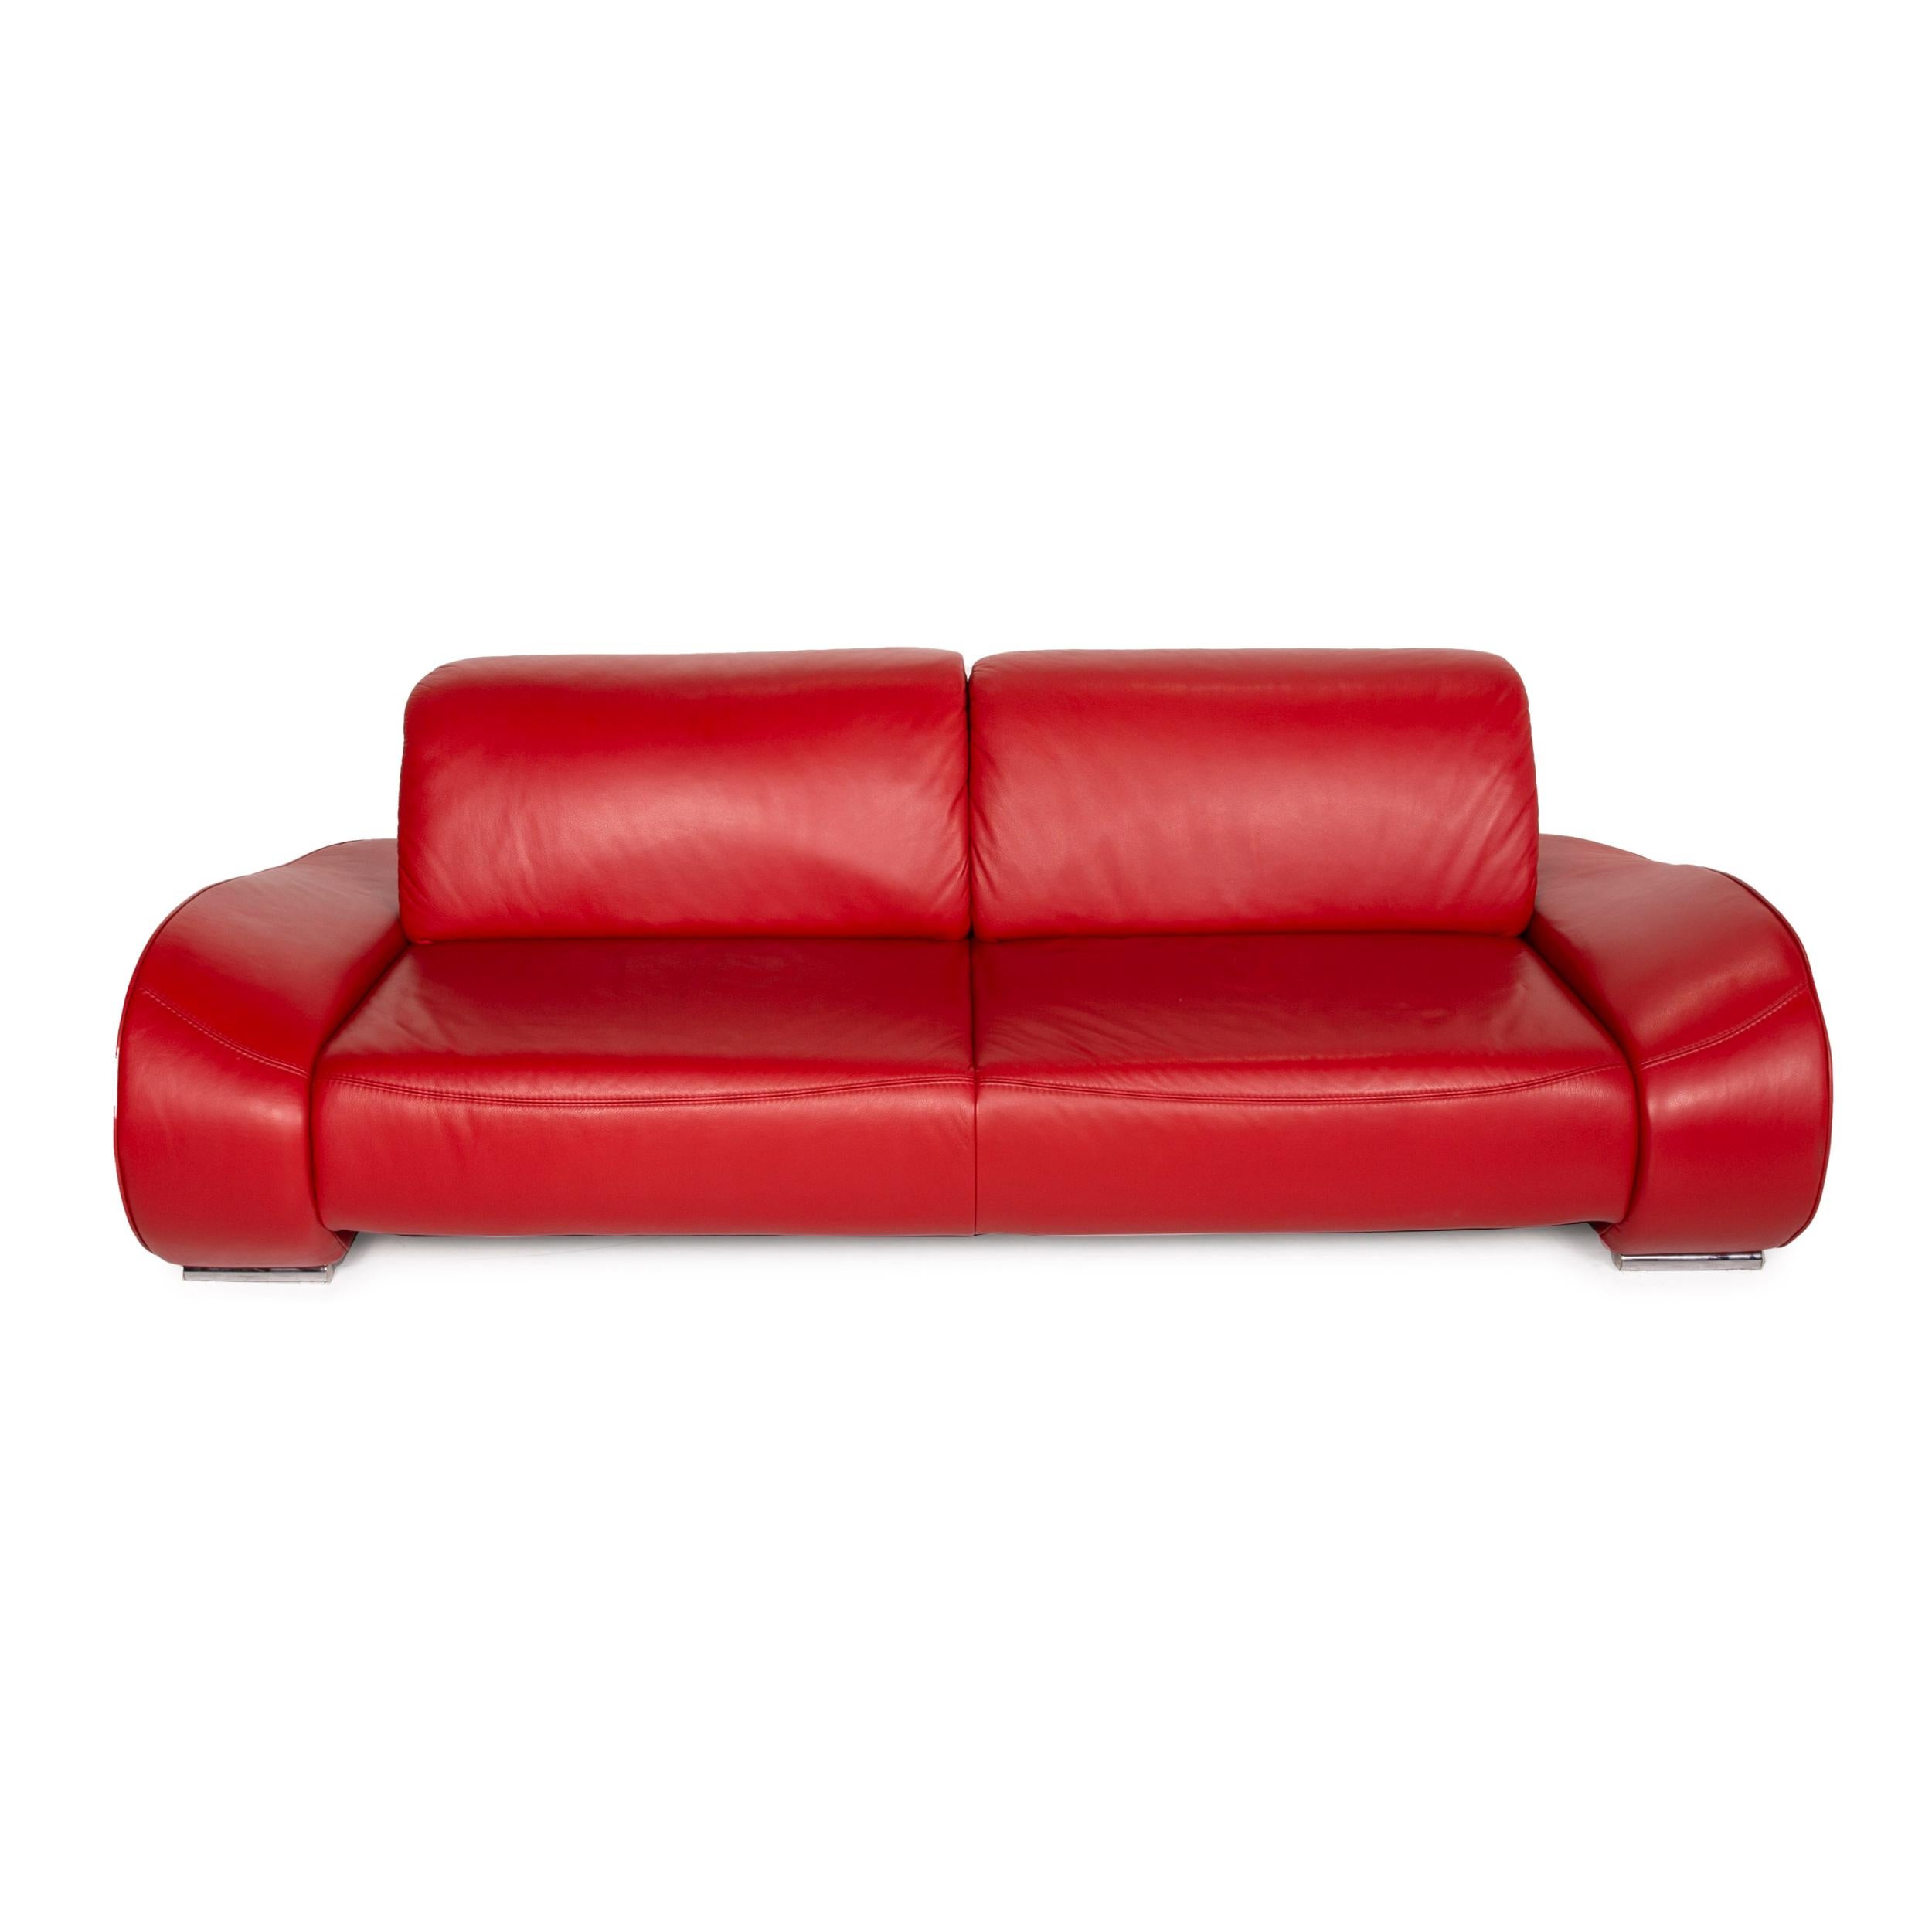 Musterring Mr-740 Leather Sofa Red Three-Seater Function 6